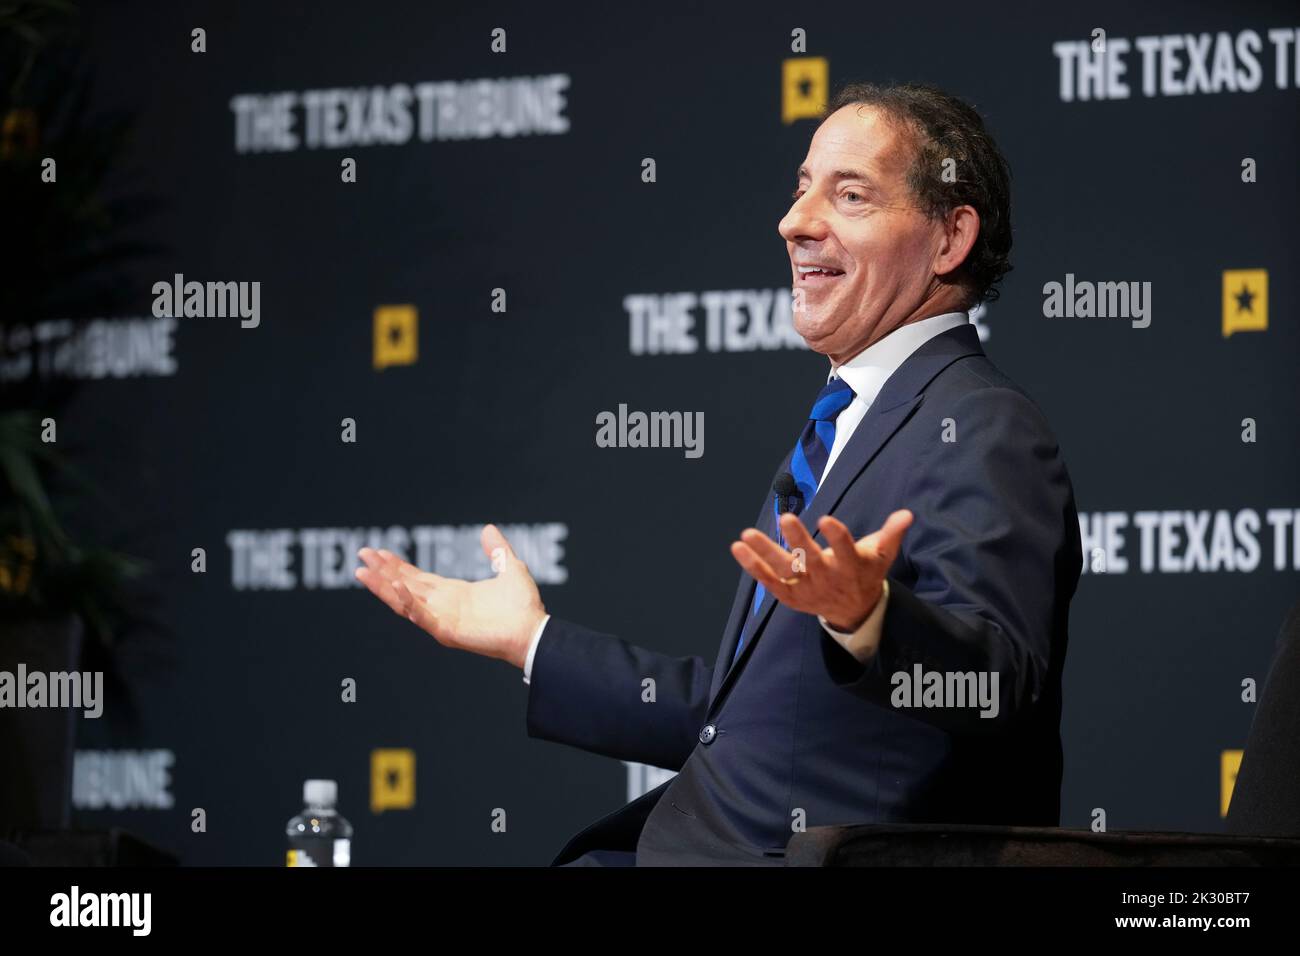 Austin, USA. 23rd Sep, 2022: U.S. Representative JAMIE RASKIN, D-Maryland, talks about his role on the January 6th Committee and what revelations are in store when its report is issued later this fall. Raskin talked at a session of the Texas Tribune Festival in downtown Austin. ©Bob Daemmrich Stock Photo